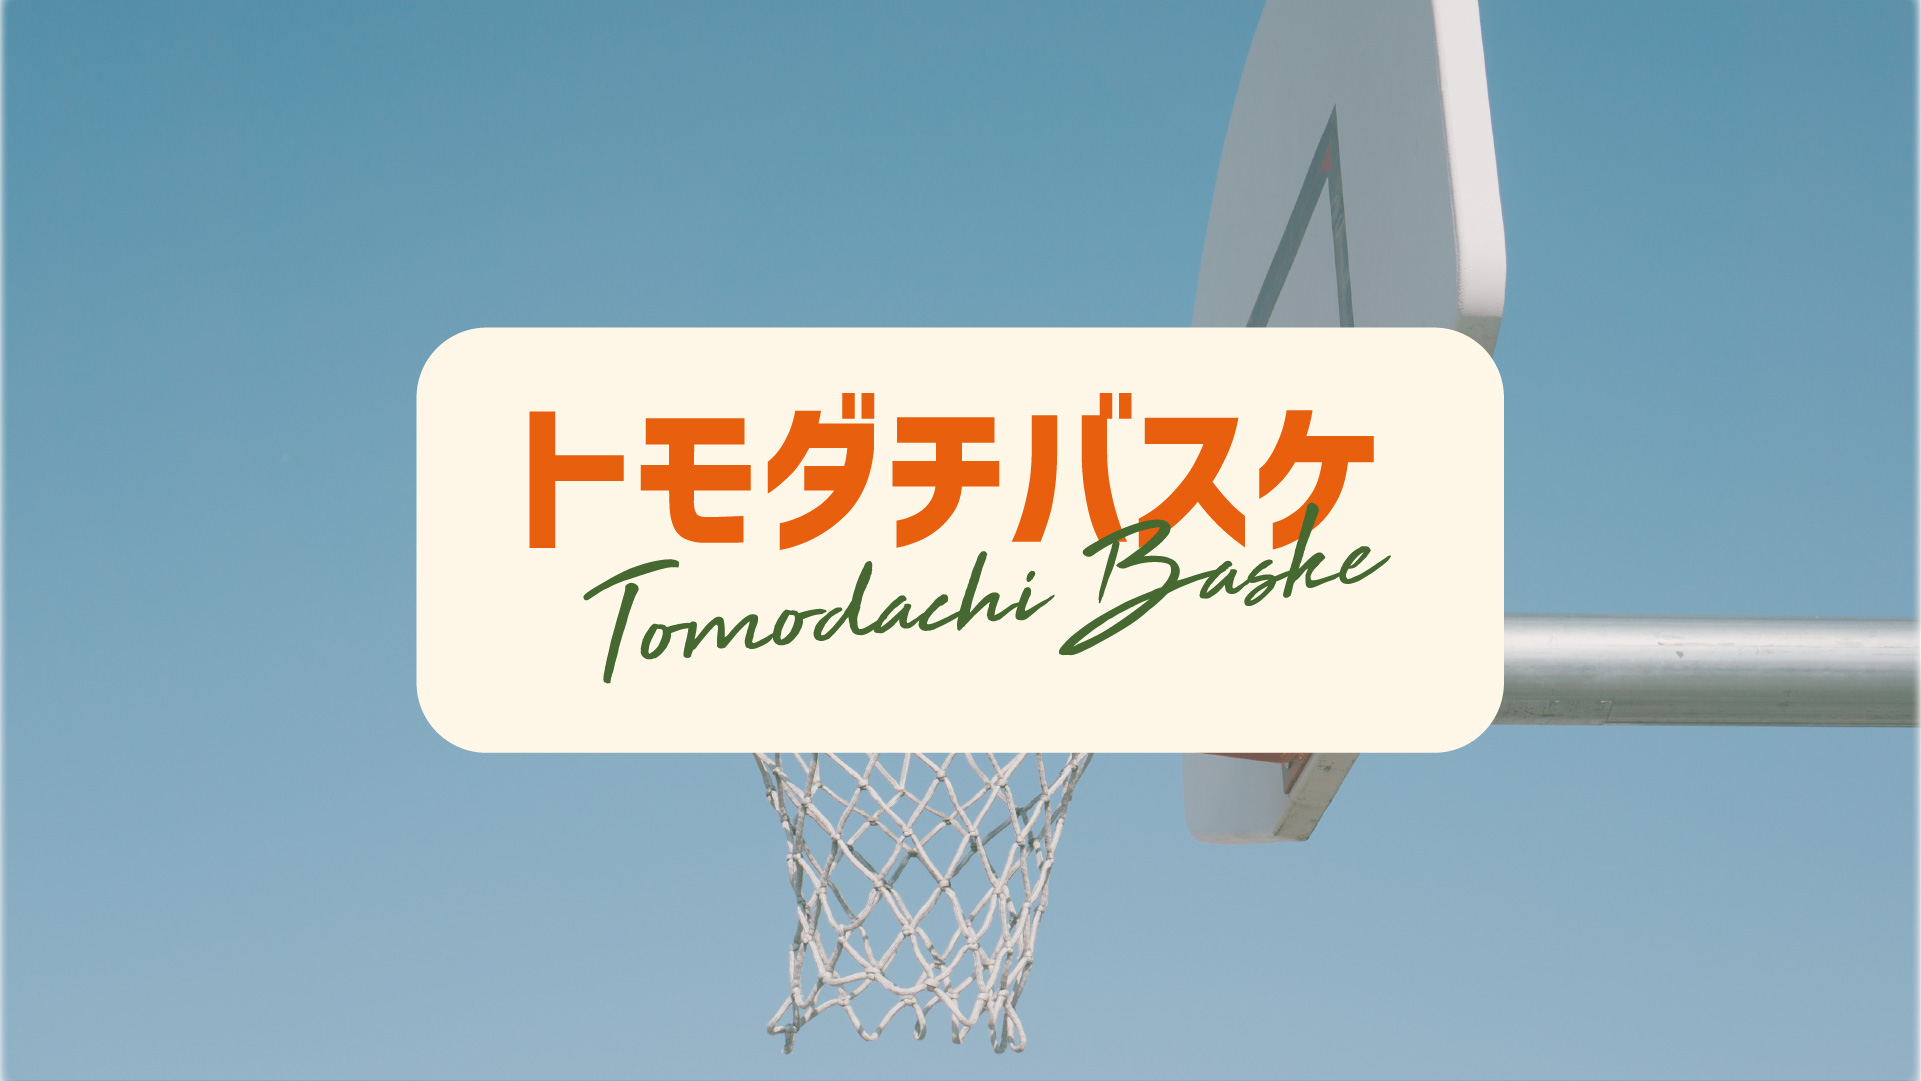 Featured image for “3/24 TOMODACHI BASKETBALL”